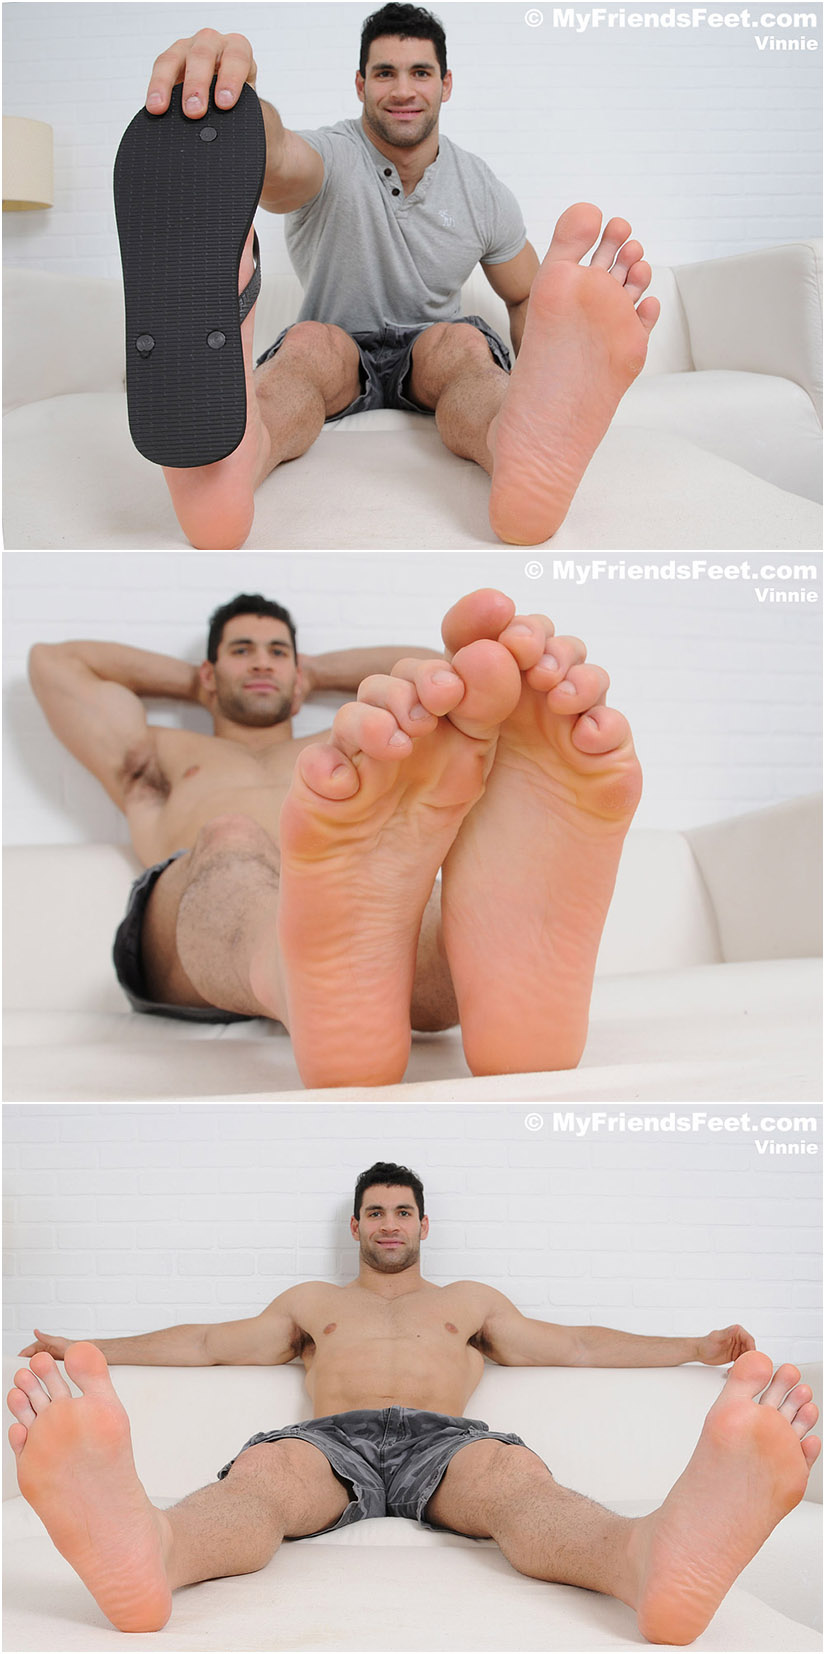 Gorgeous Italian hunk shows off his big, masculine bare feet